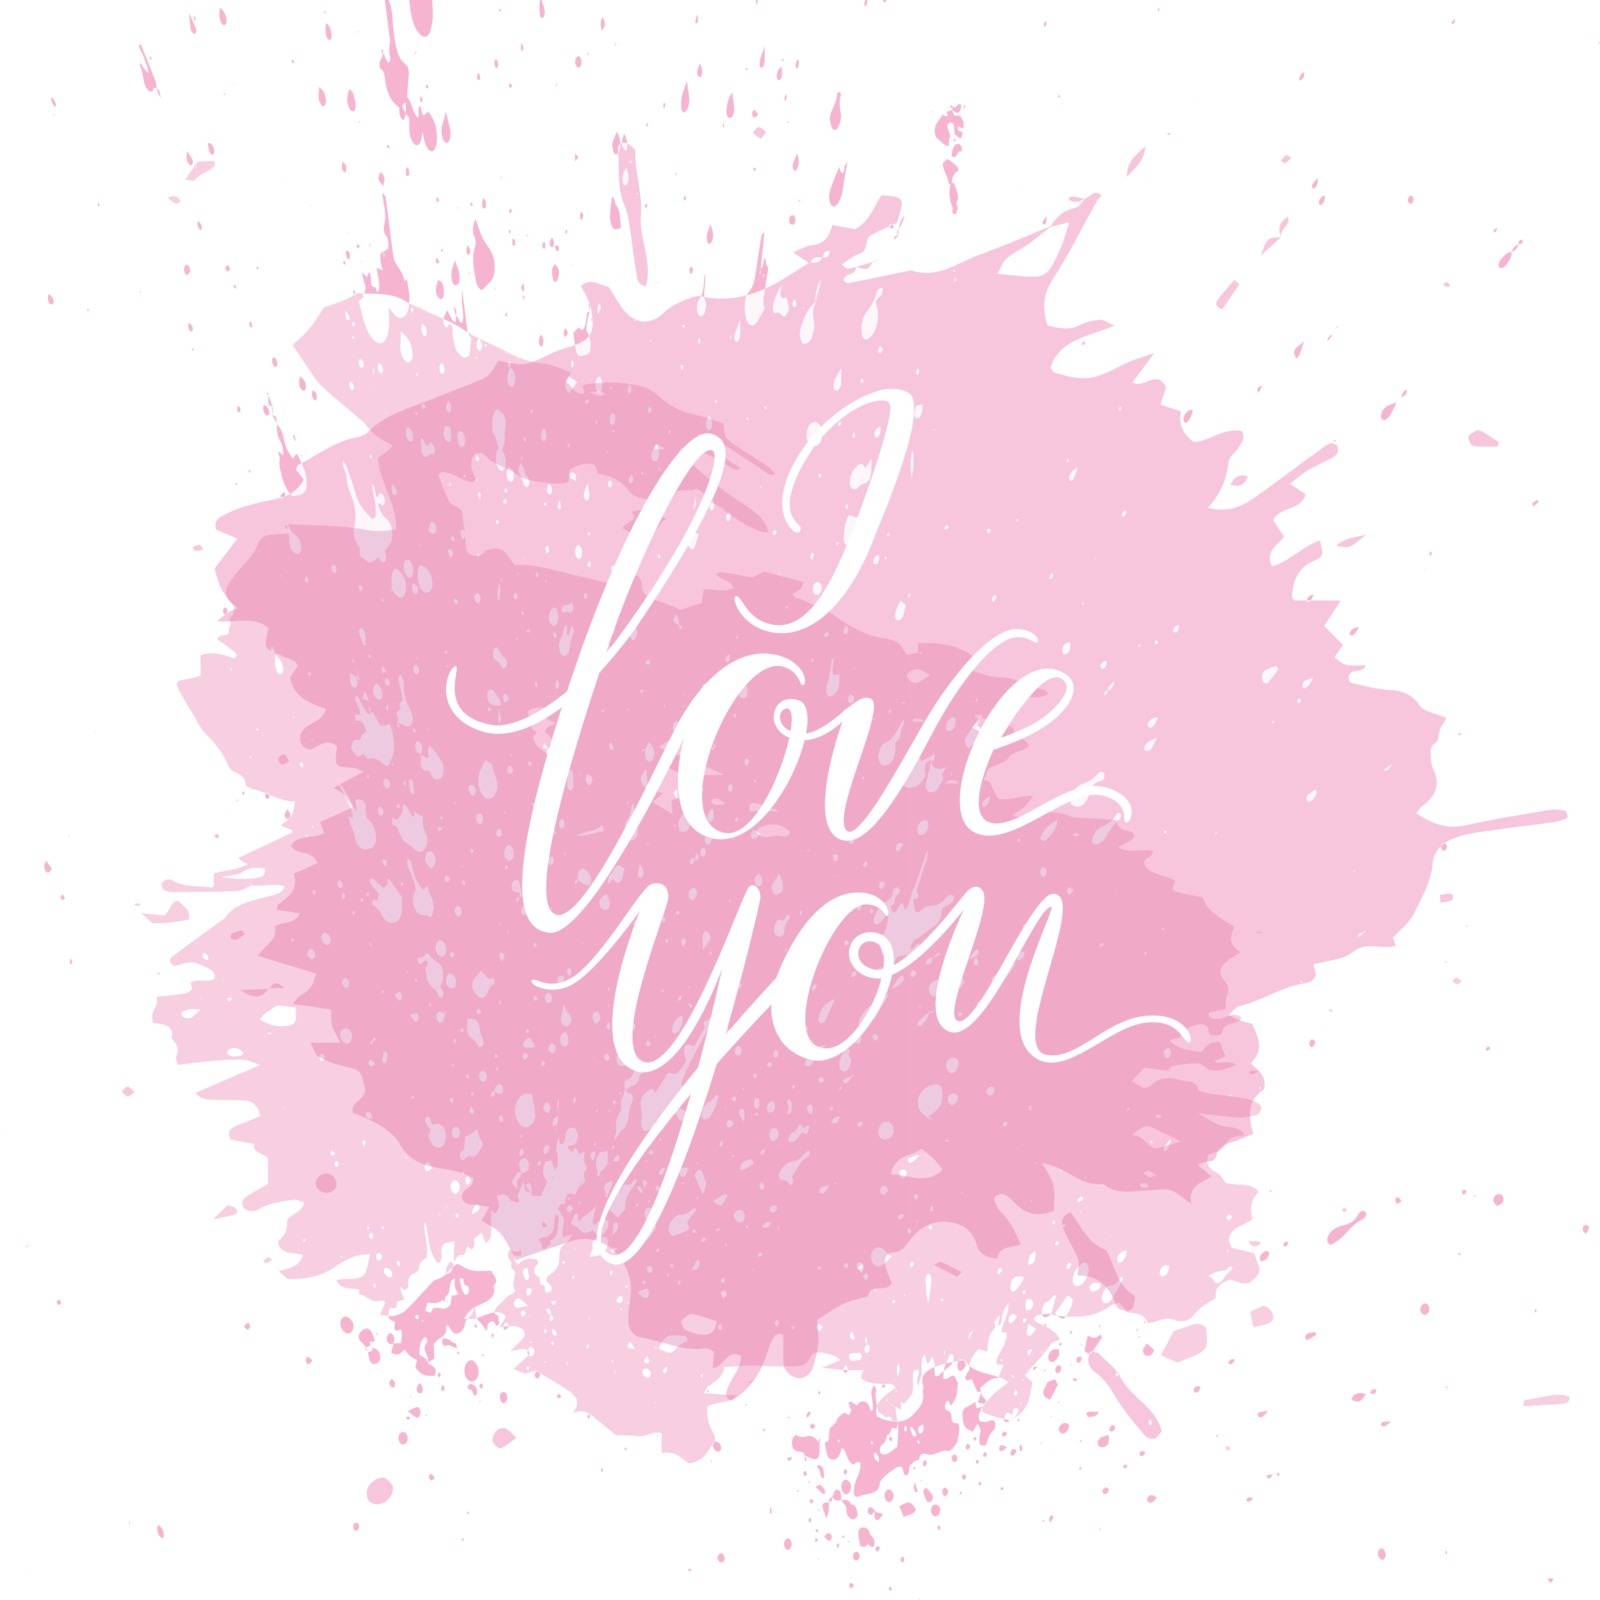 Abstract watercolor spot background and the inscription I LOVE YOU. Splash texture background isolated on white. by nutela_pancake